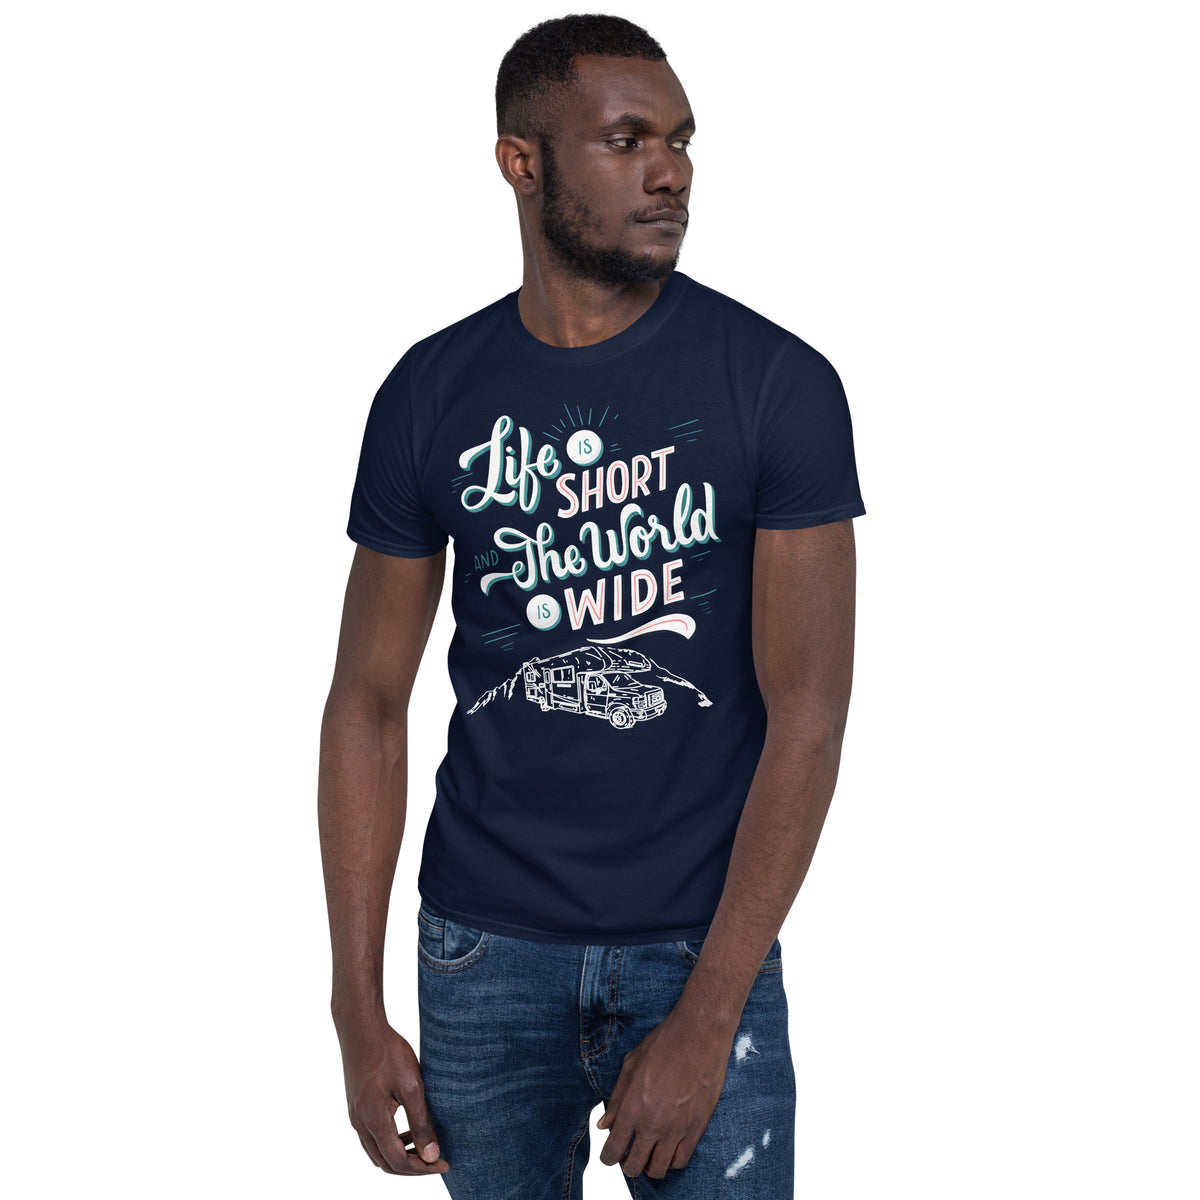 Cooles Herren Spruch Shirt "The Wold Wide"